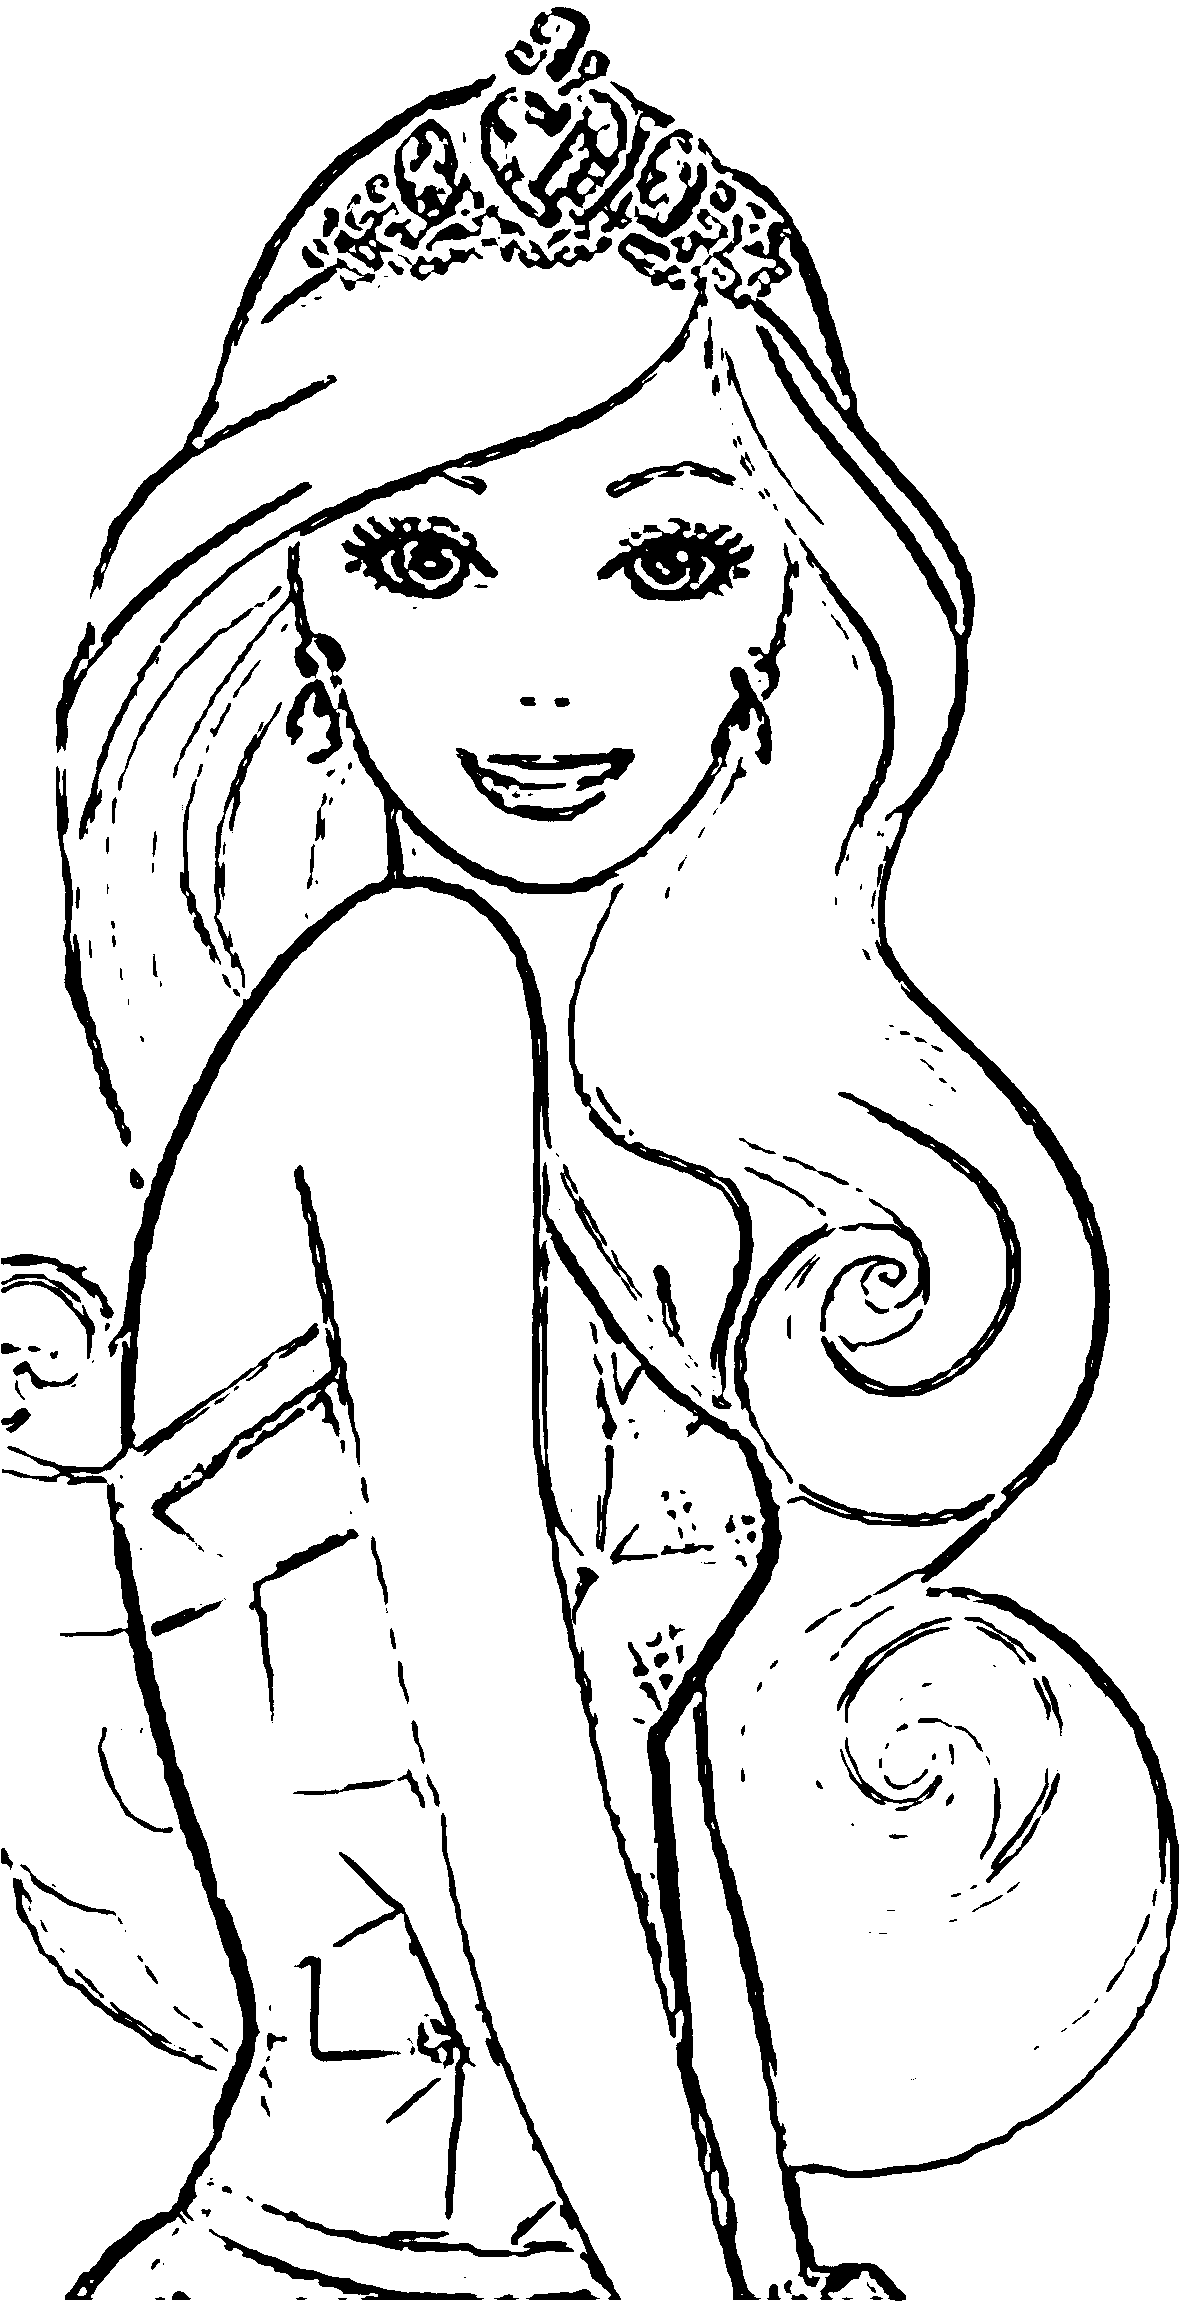 Barbie Face Coloring Page | Wecoloringpage